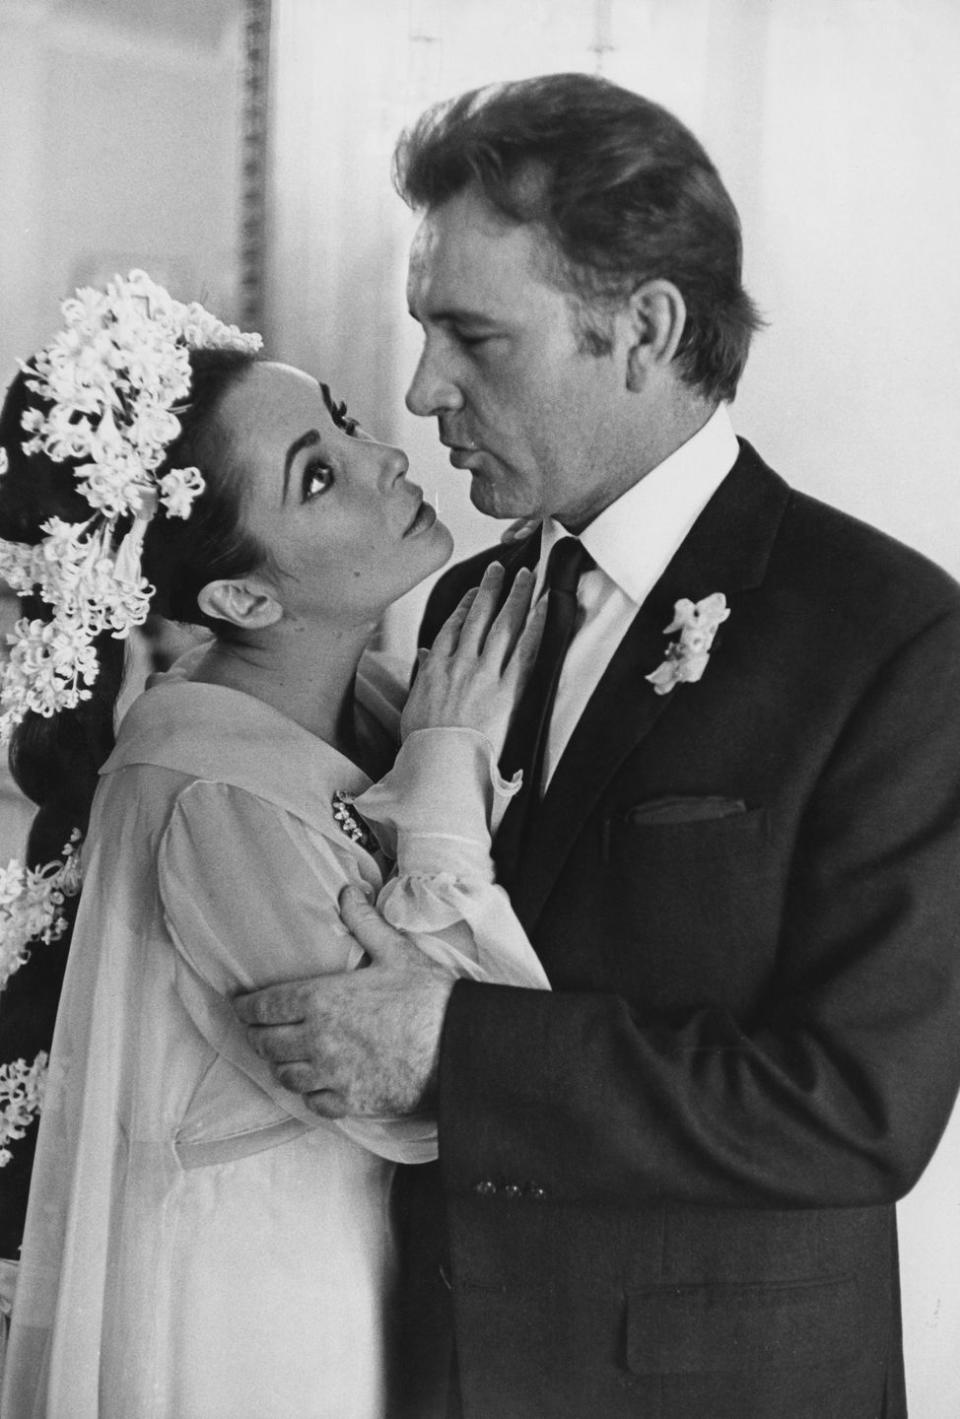 1964: Elizabeth Taylor and Richard Burton marry (for the first time)